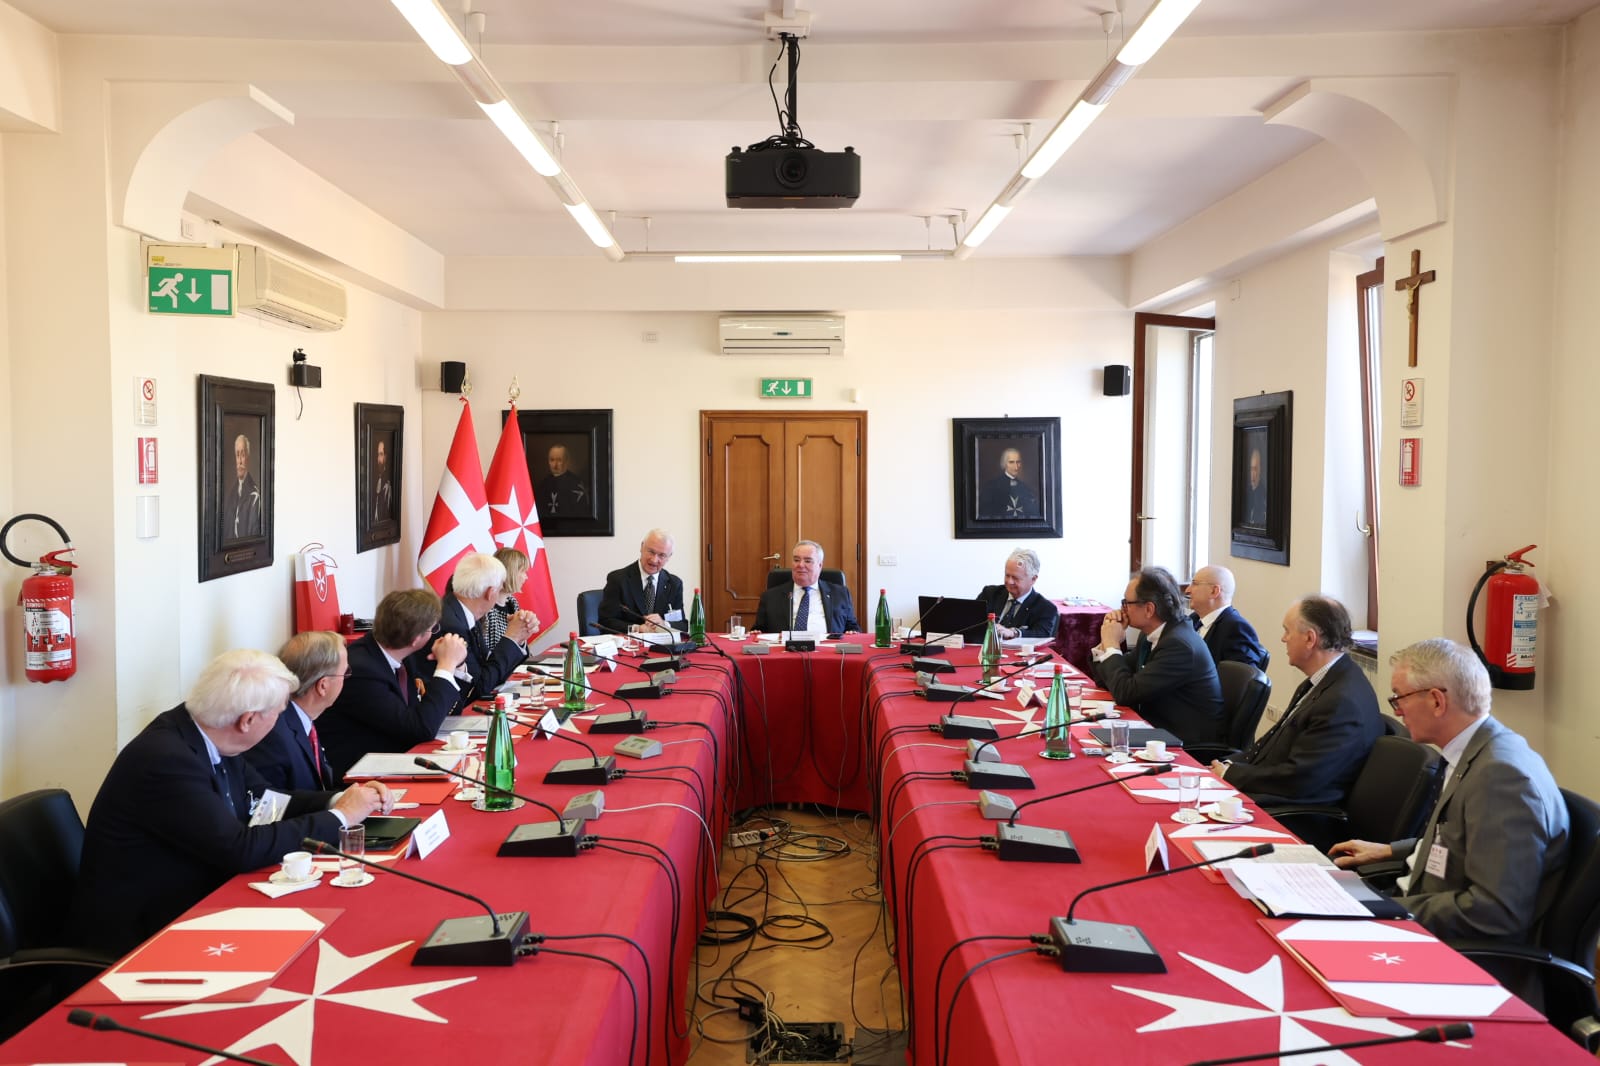 Alliance of the Orders of Saint John meets with Order of Malta at Magistral Palace